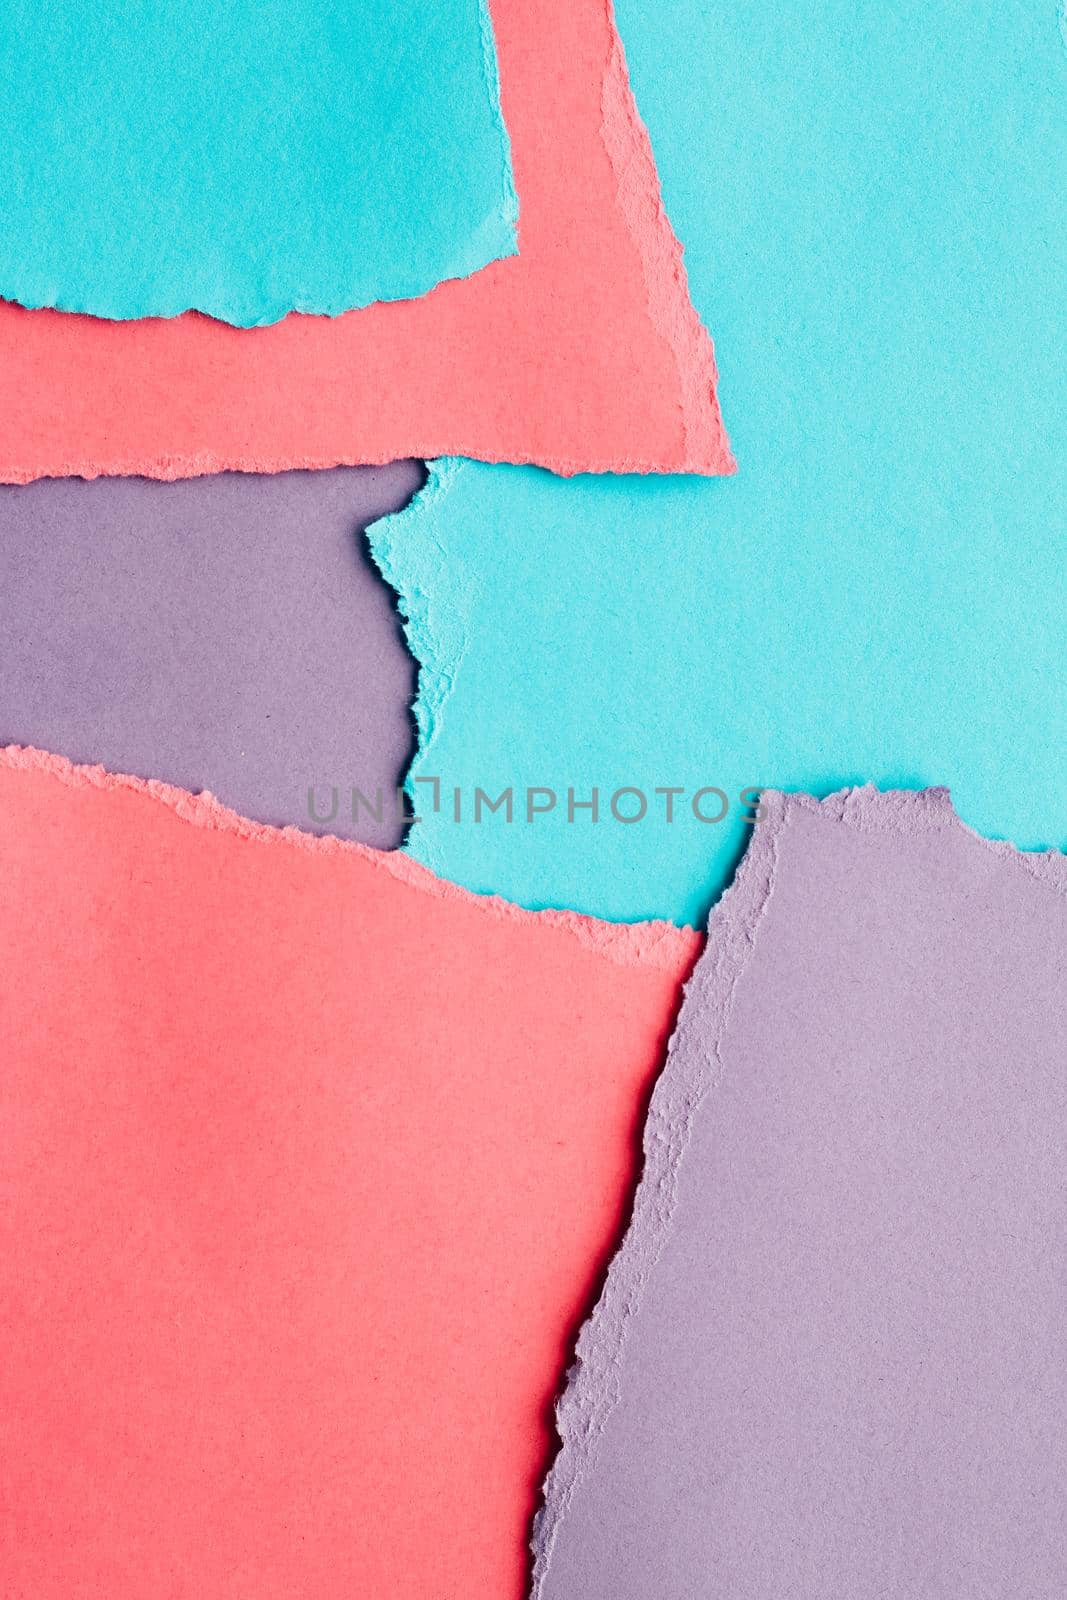 Torn paper texture as background. Always stay creative